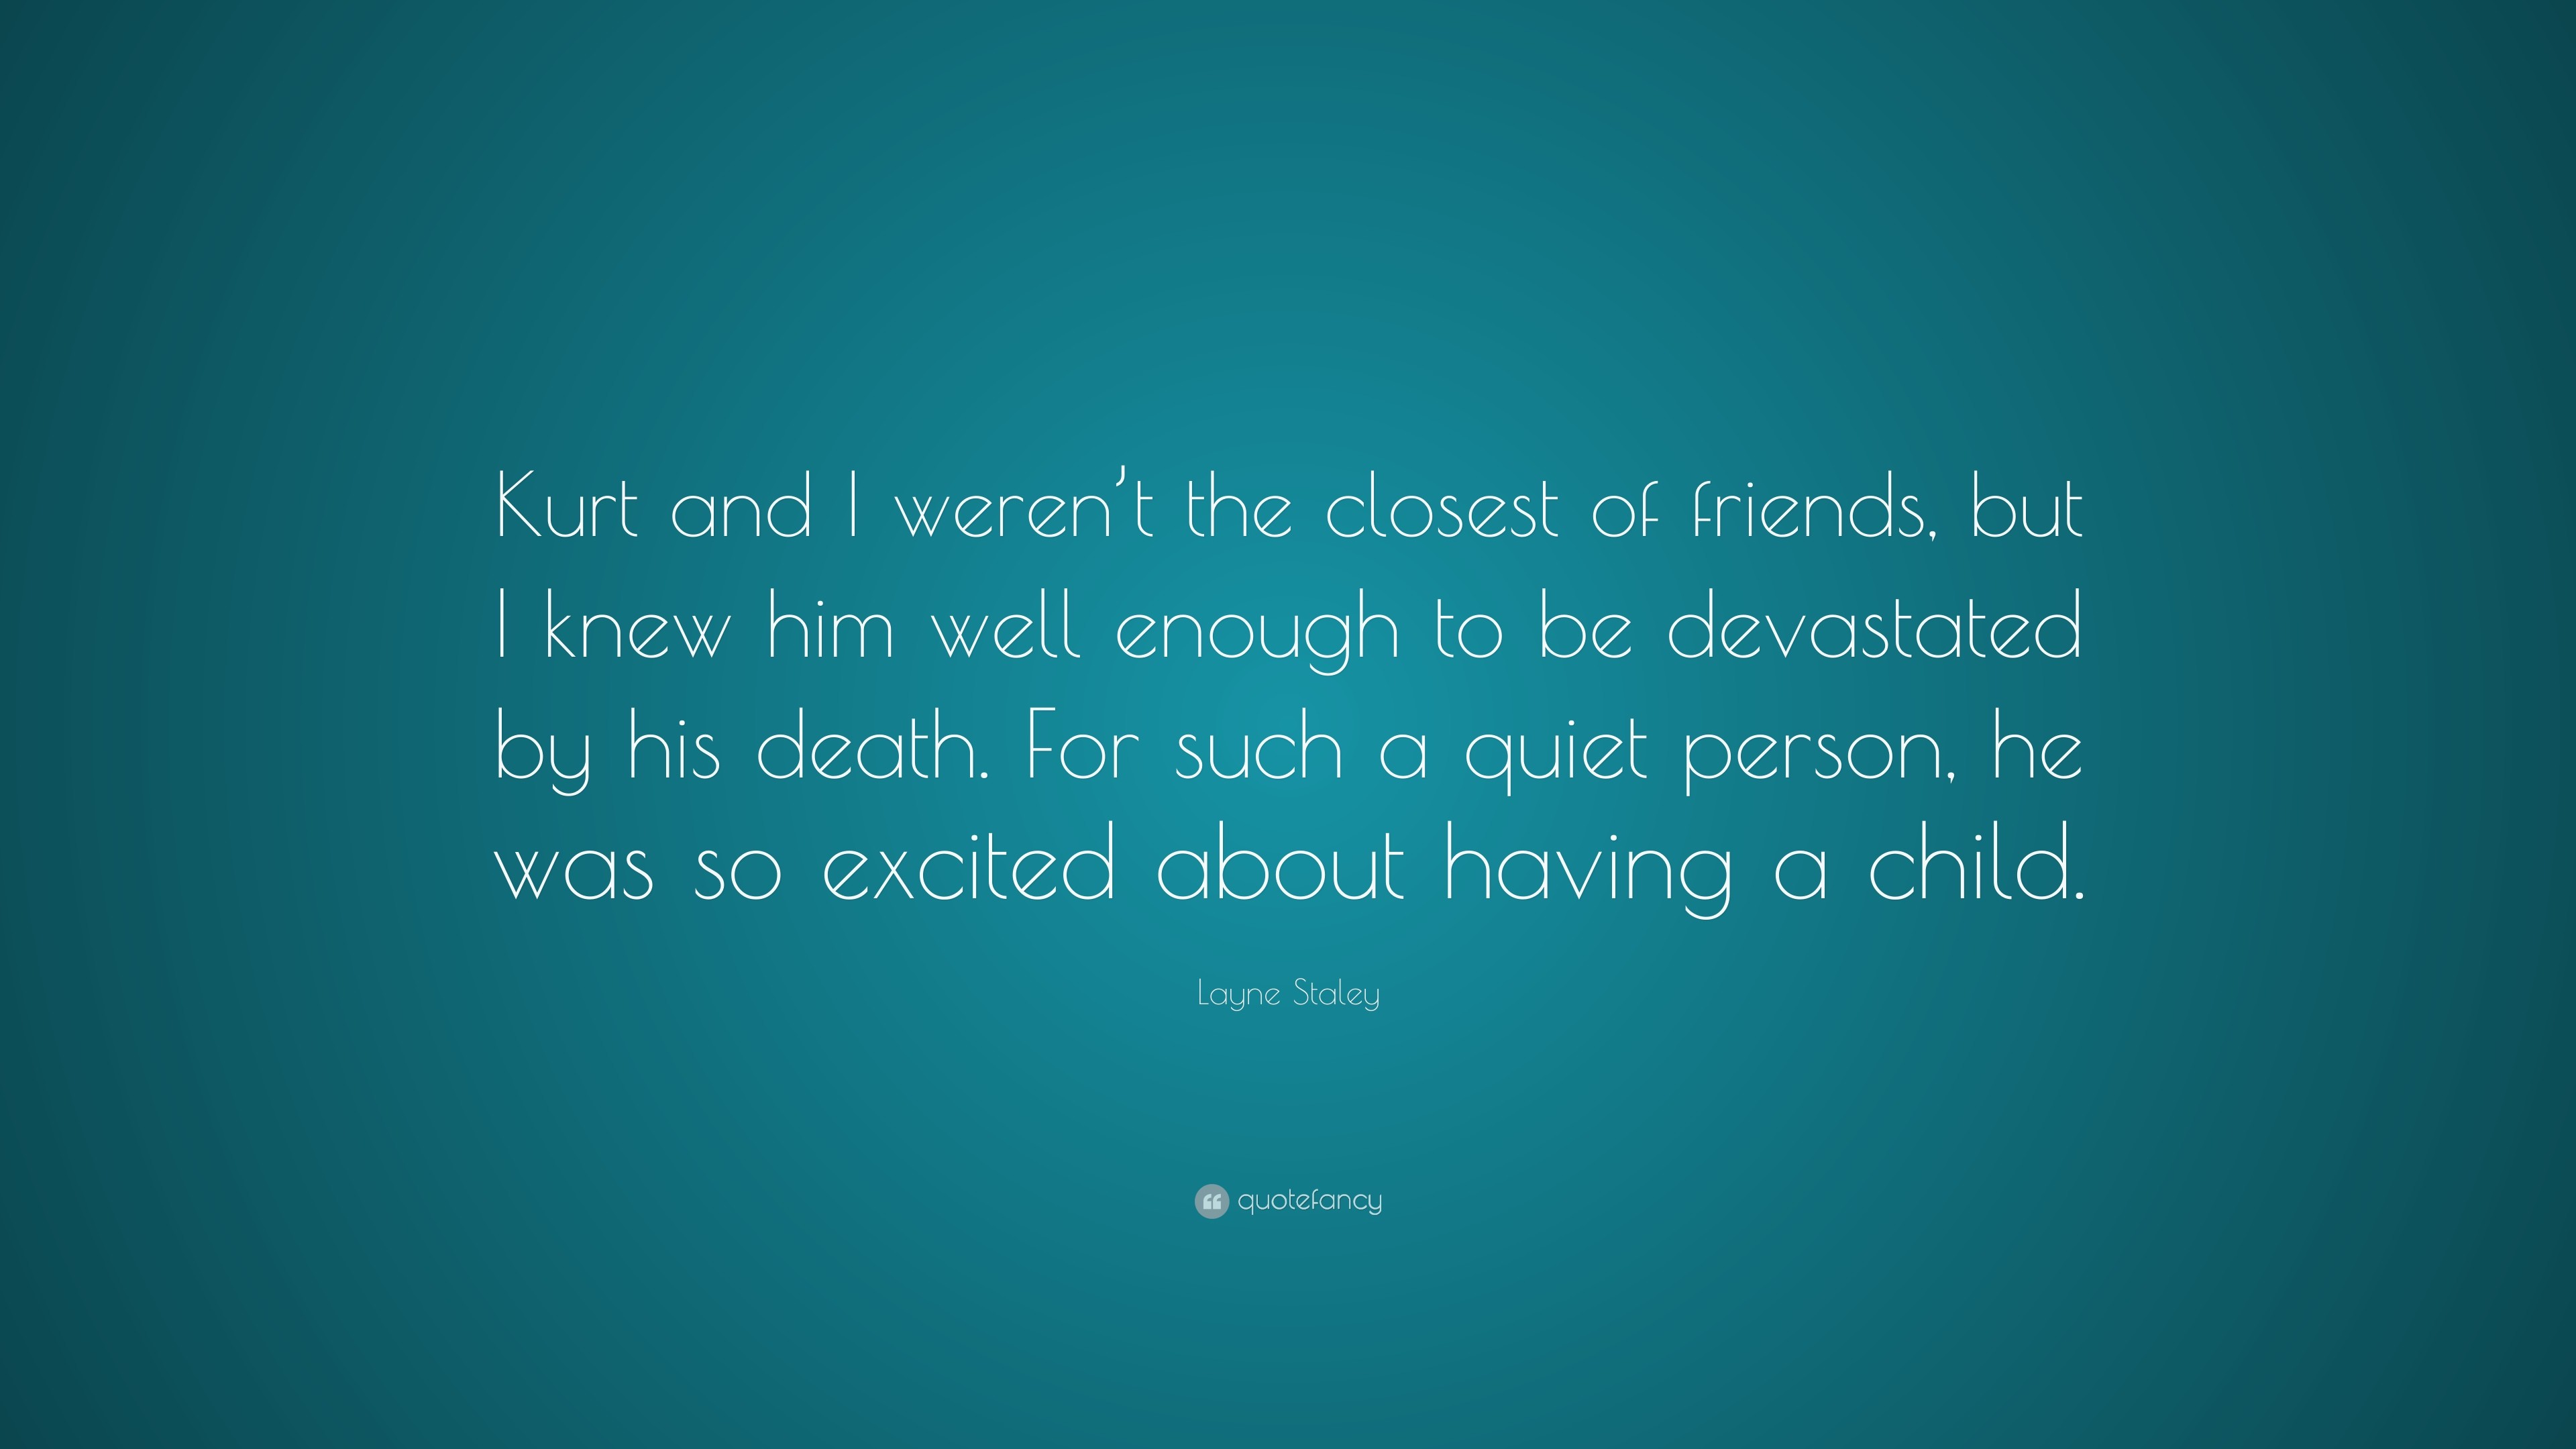 3840x2160 Layne Staley Quote: “Kurt and I weren't the closest of friends,